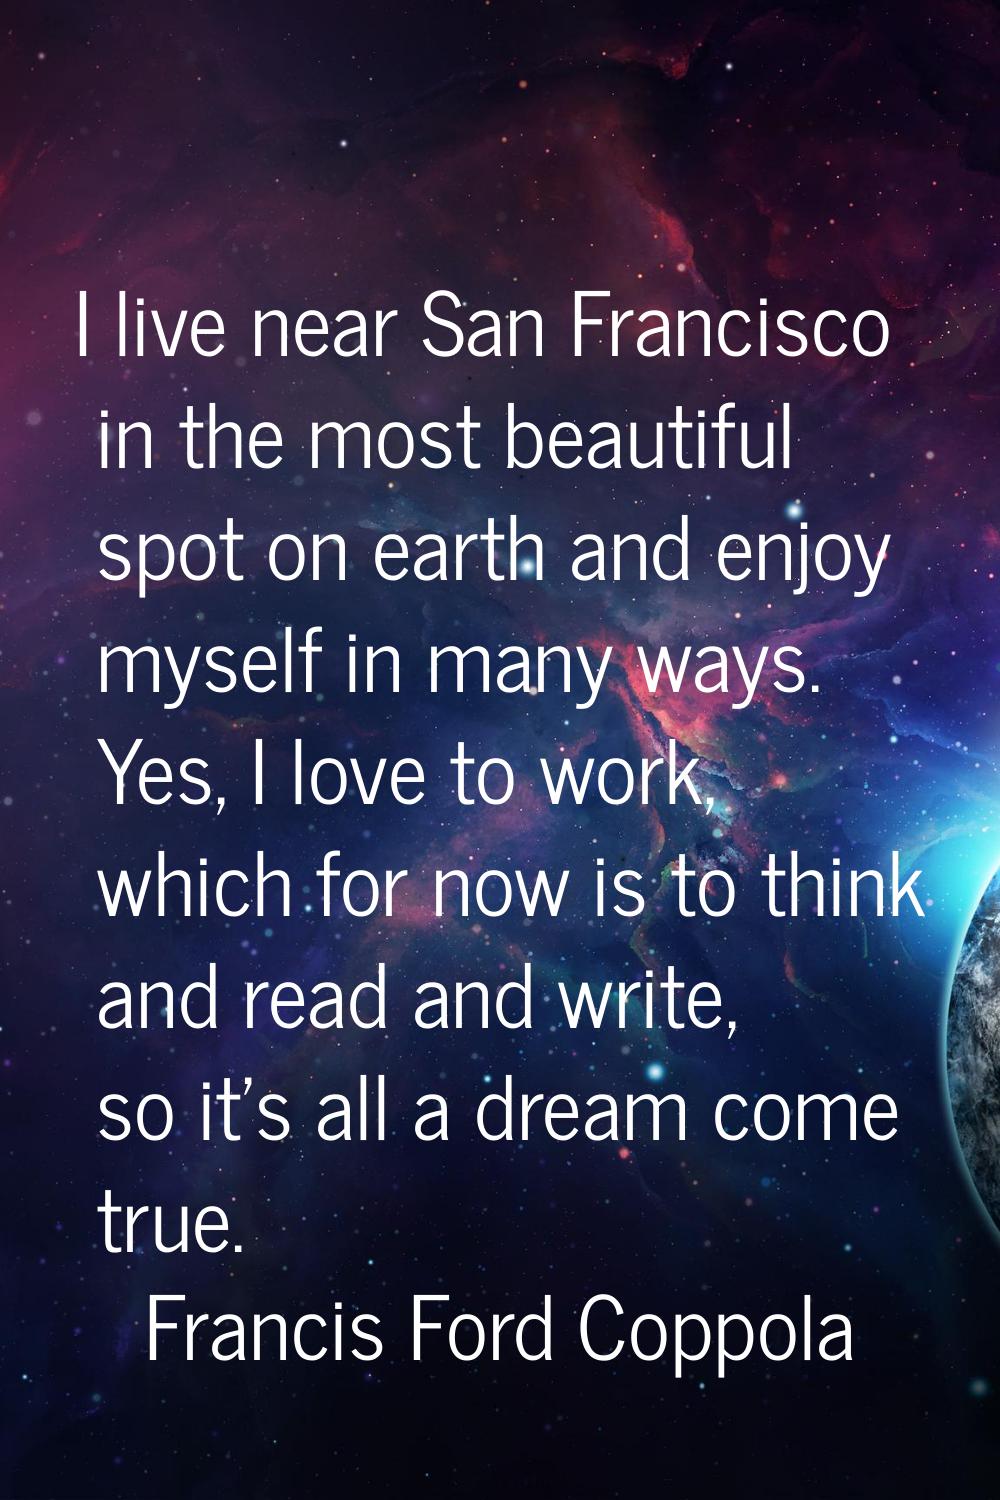 I live near San Francisco in the most beautiful spot on earth and enjoy myself in many ways. Yes, I